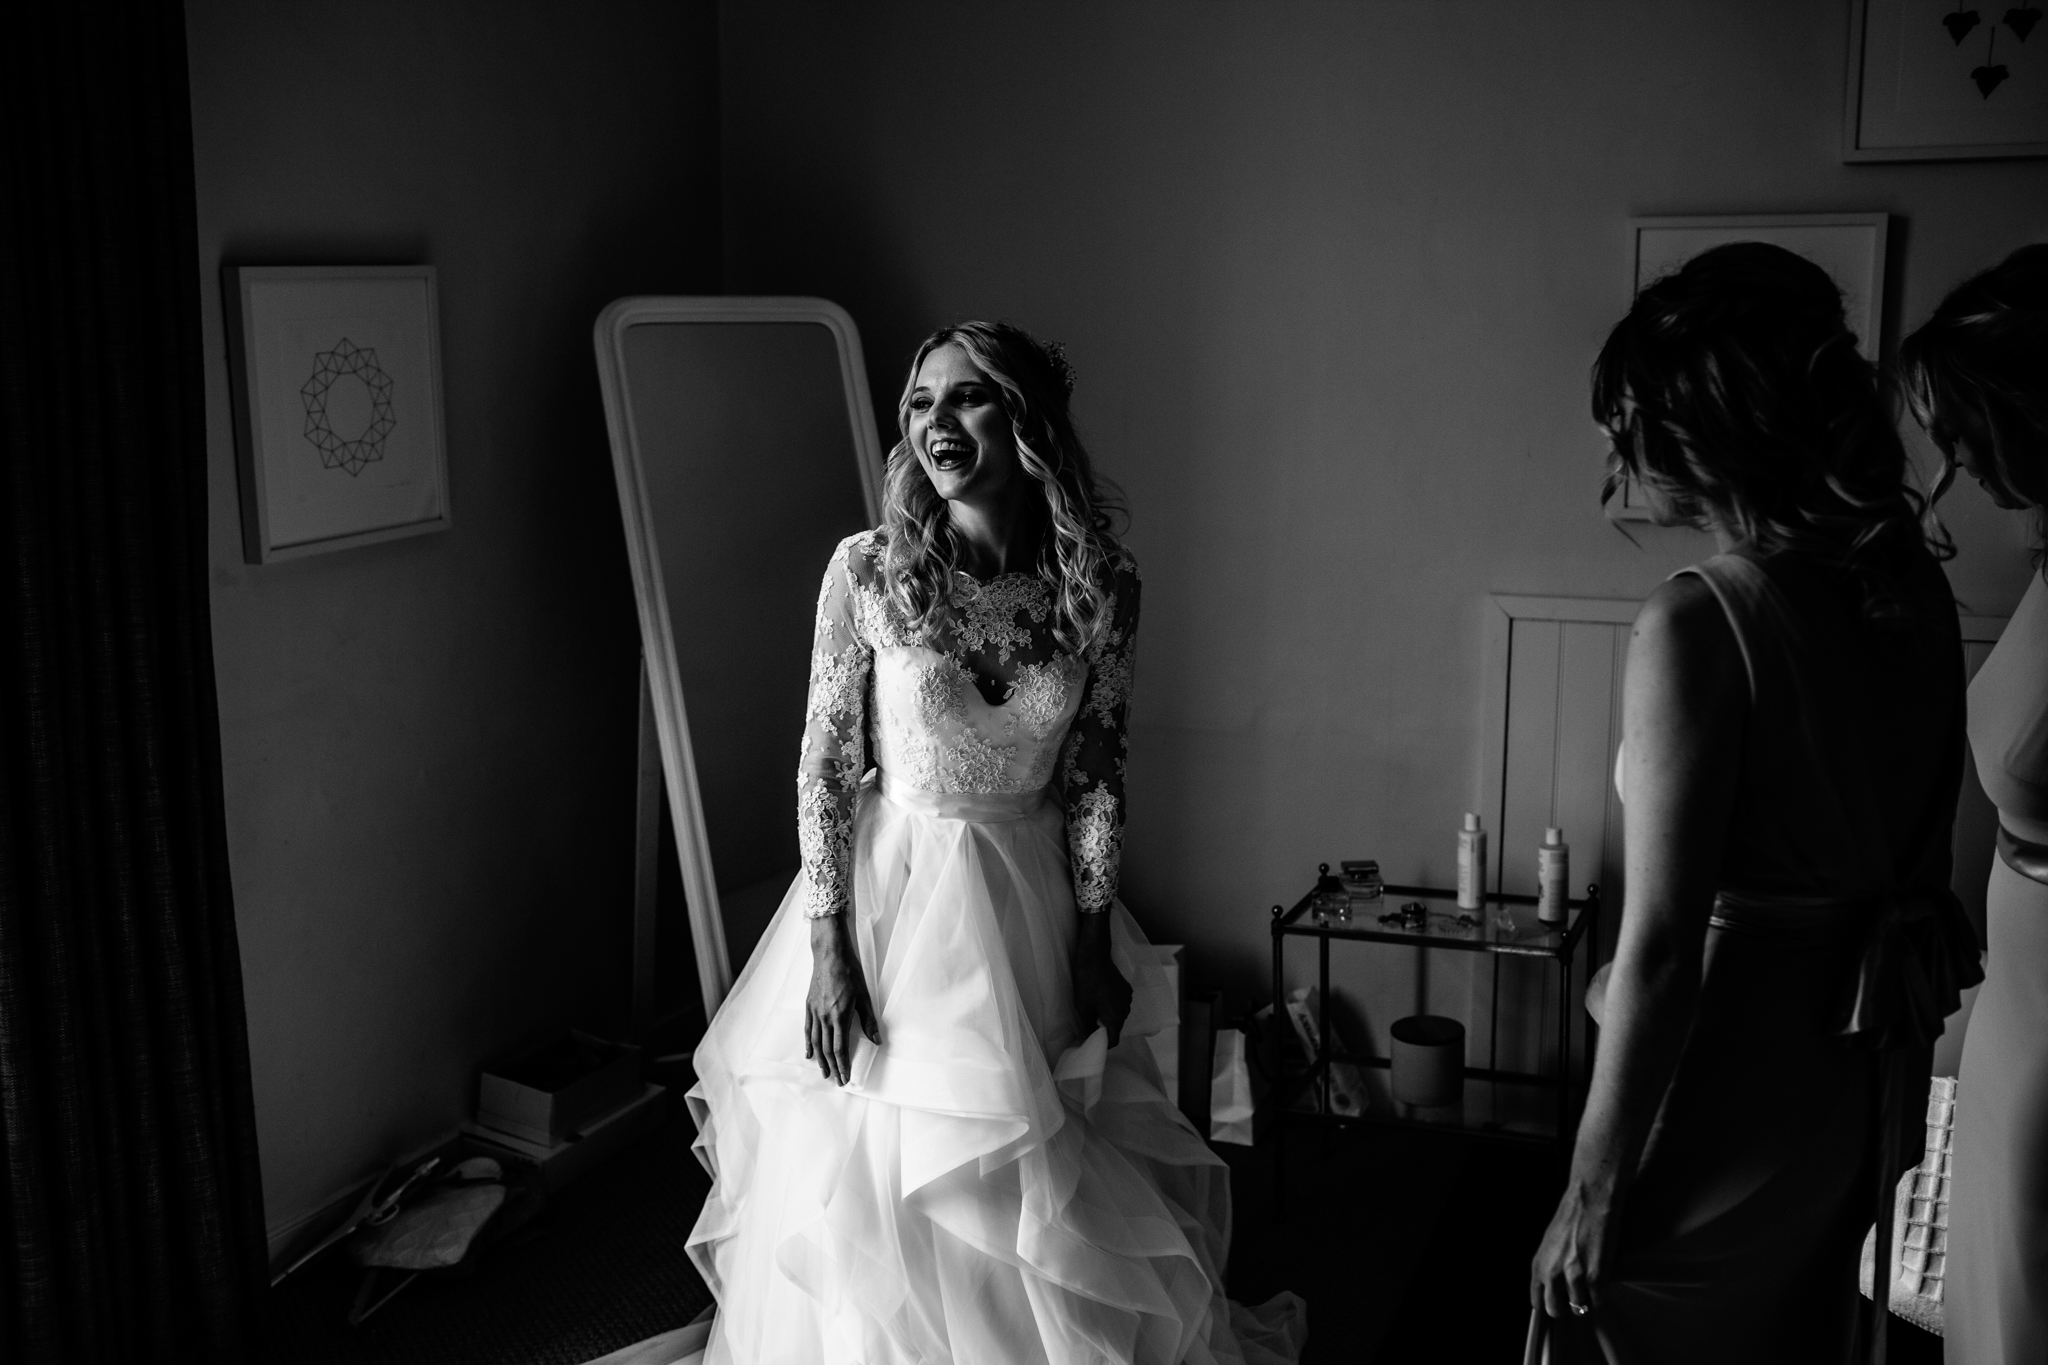 Bride wearing Emma Tindley separates of a lace top and layered skirt